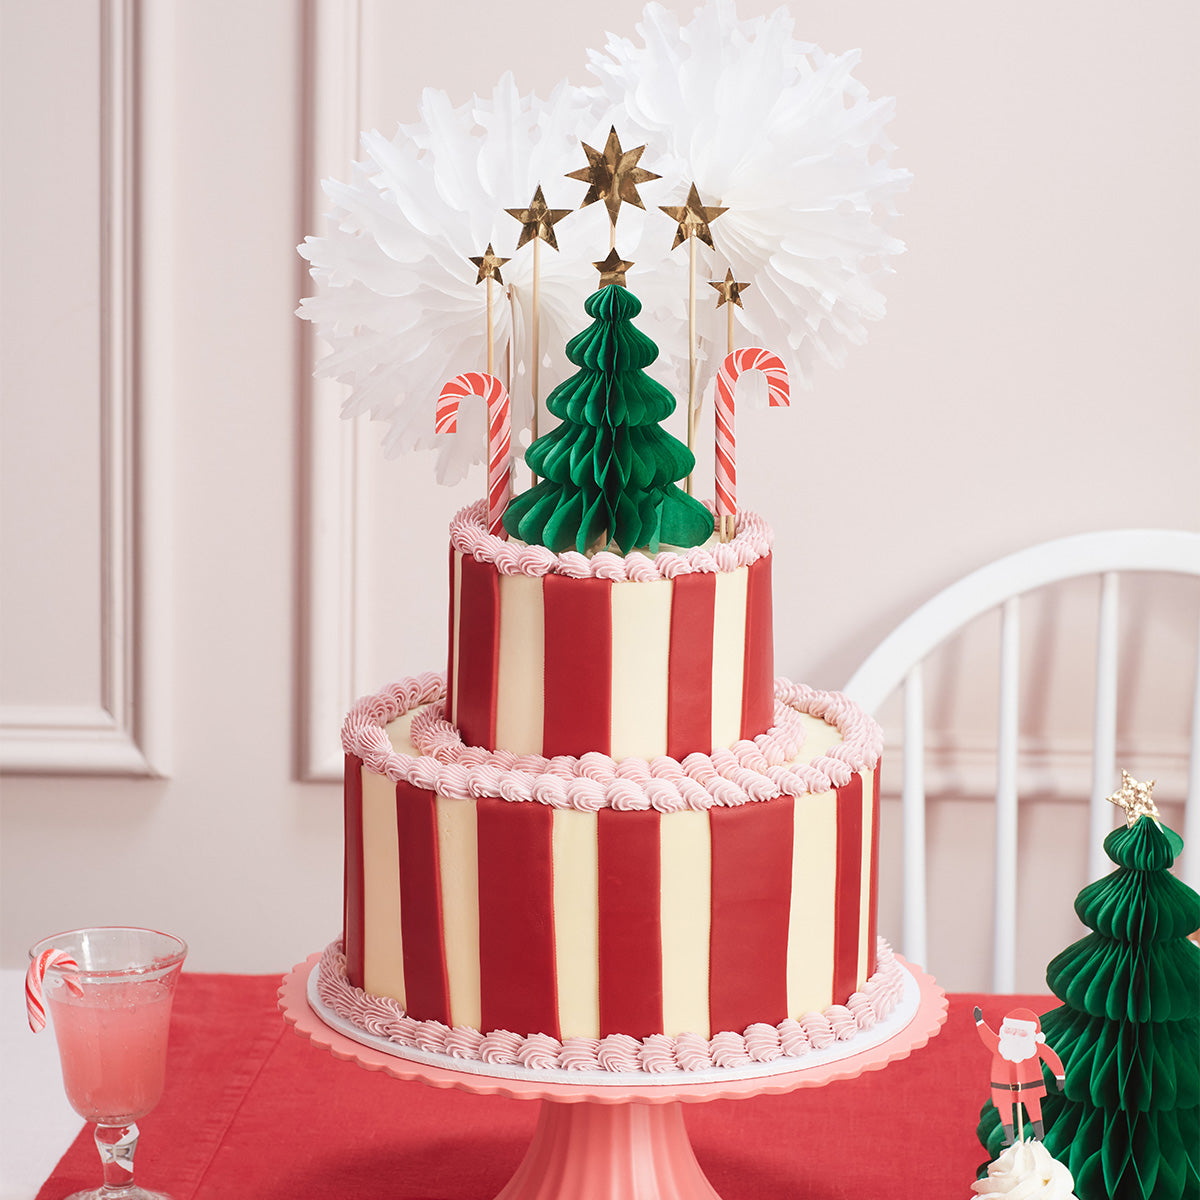 Our Christmas cake decorations include gold glitter star cake toppers and a honeycomb 3D Christmas tree.